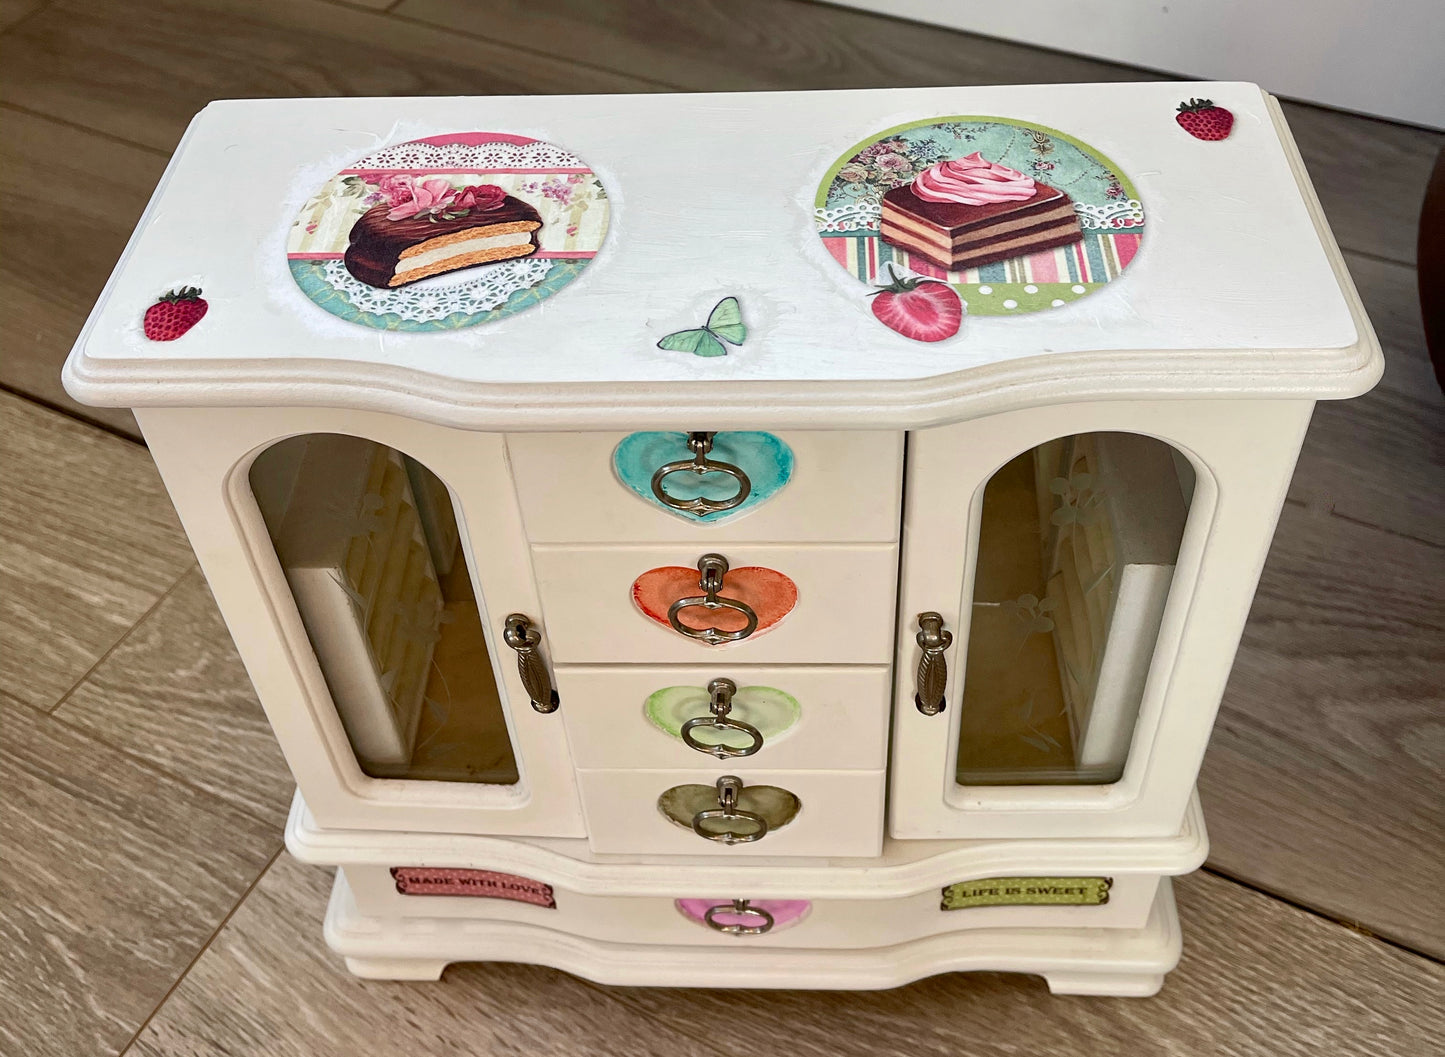 Upcycled Jewerly Cabinet, Little Girls Jewerly Cabinet, Lovecycled